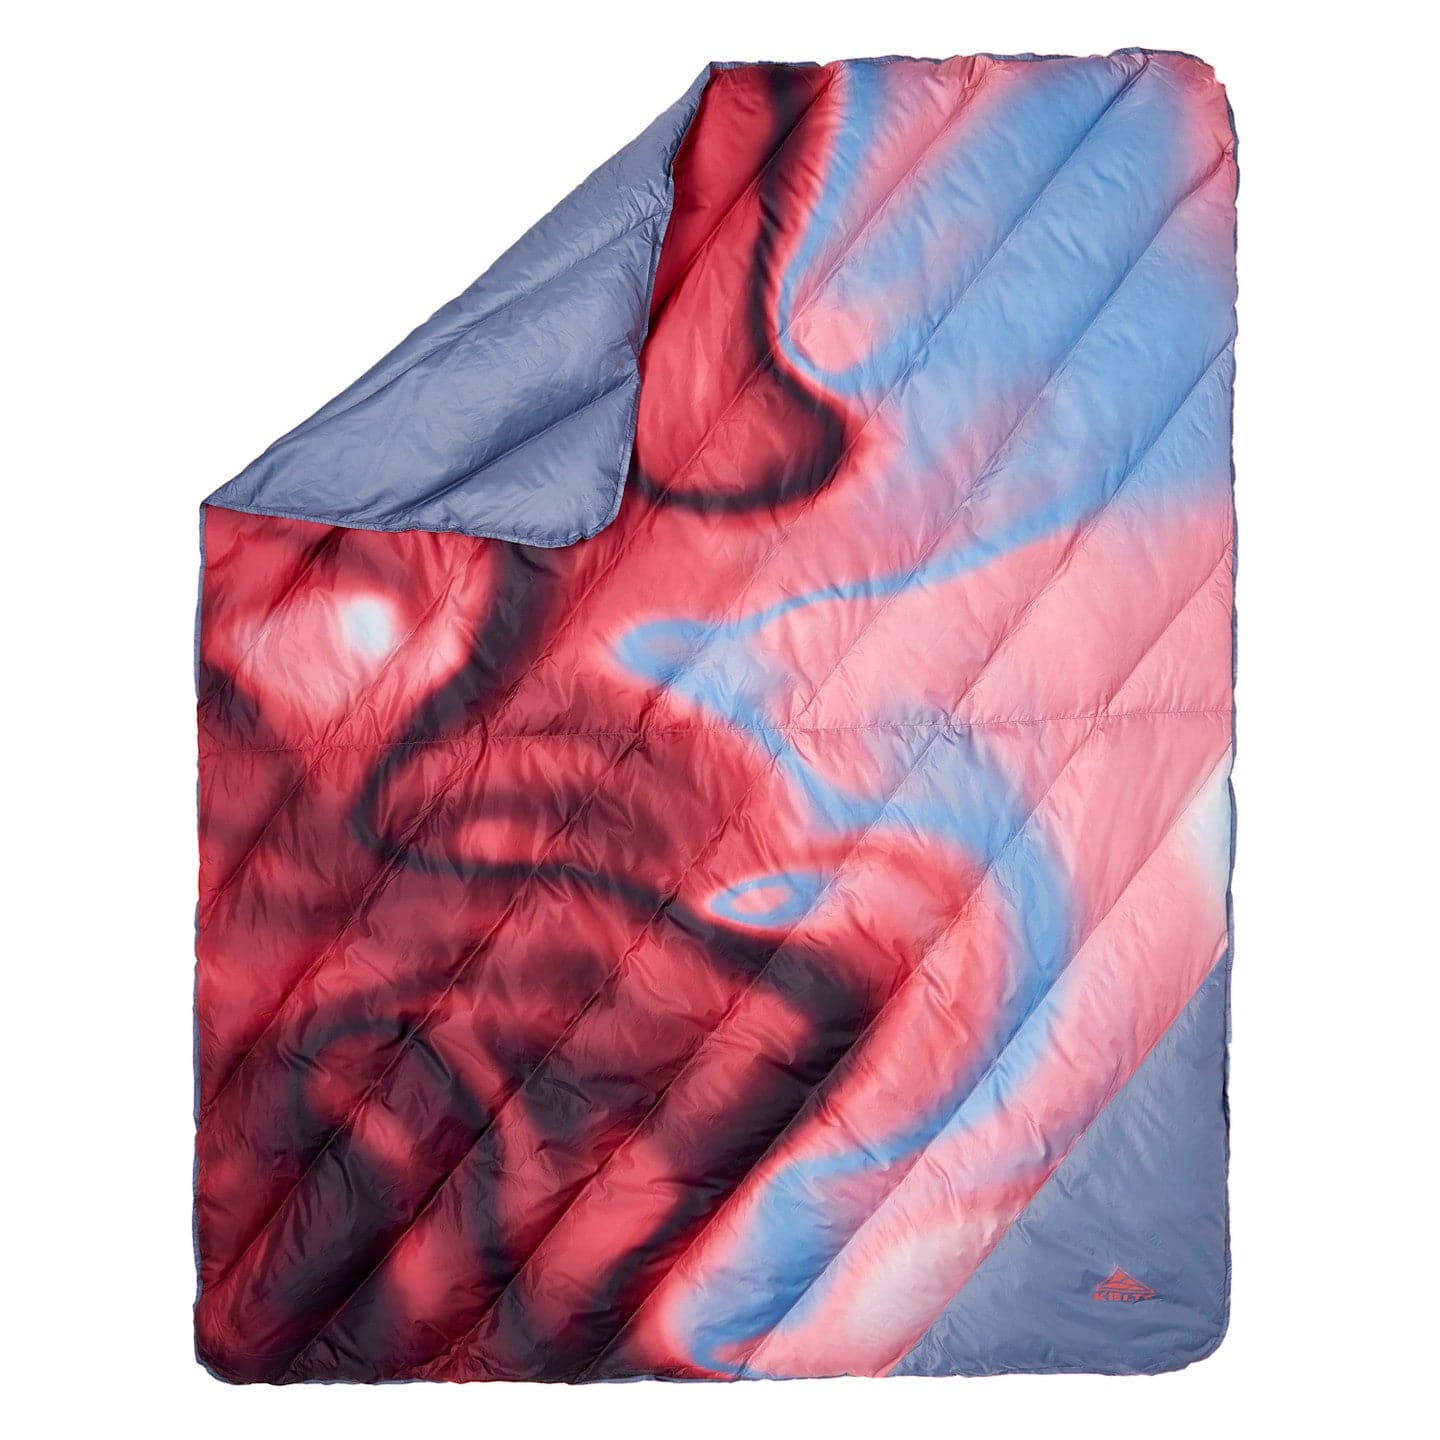 Featuring the Galactic Down Blanket down blanket manufactured by Kelty shown here from one angle.